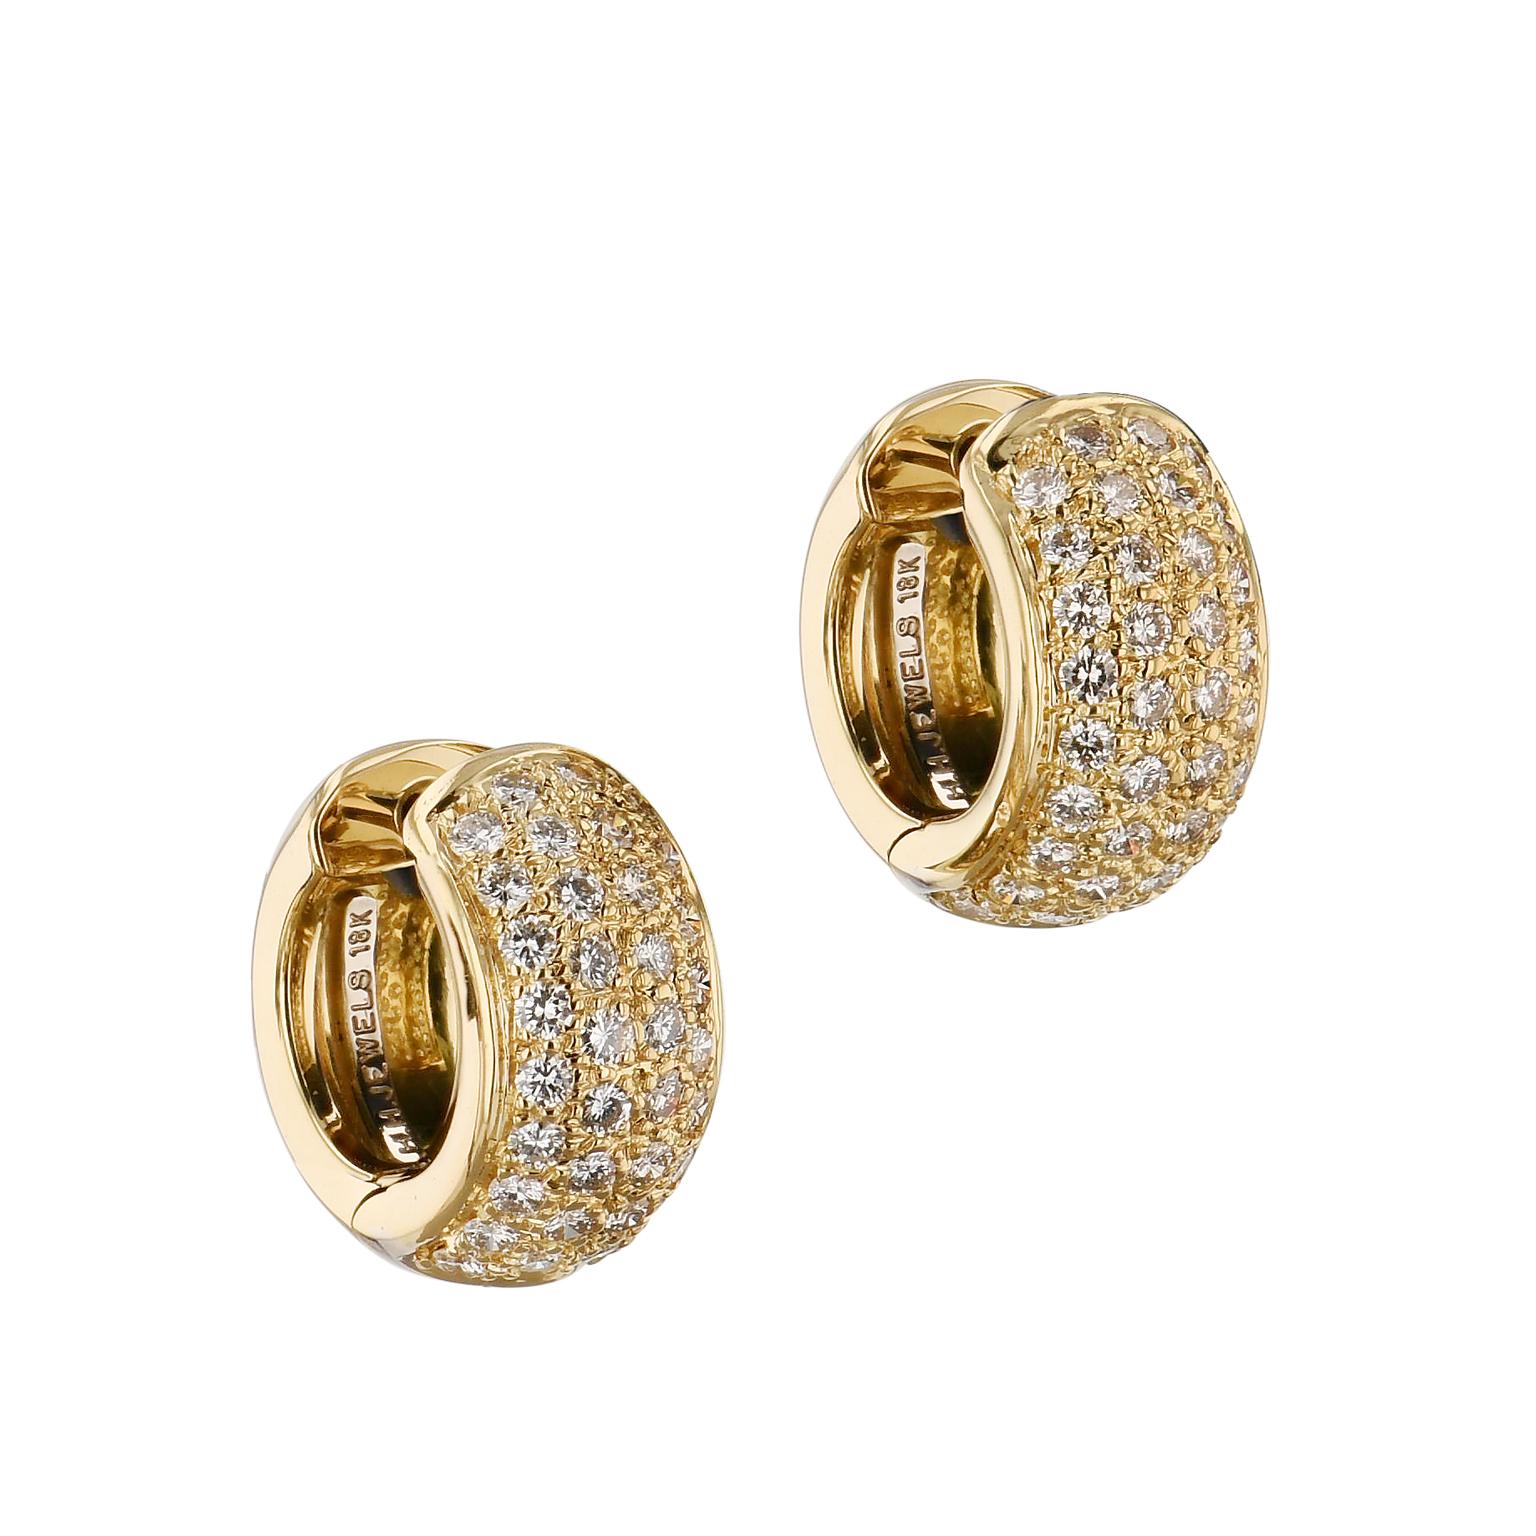 Give your ear a hug! Especially with 18 karat yellow gold “Huggie” earrings embellished in 1.13 carats of pave set diamonds (H-VS).